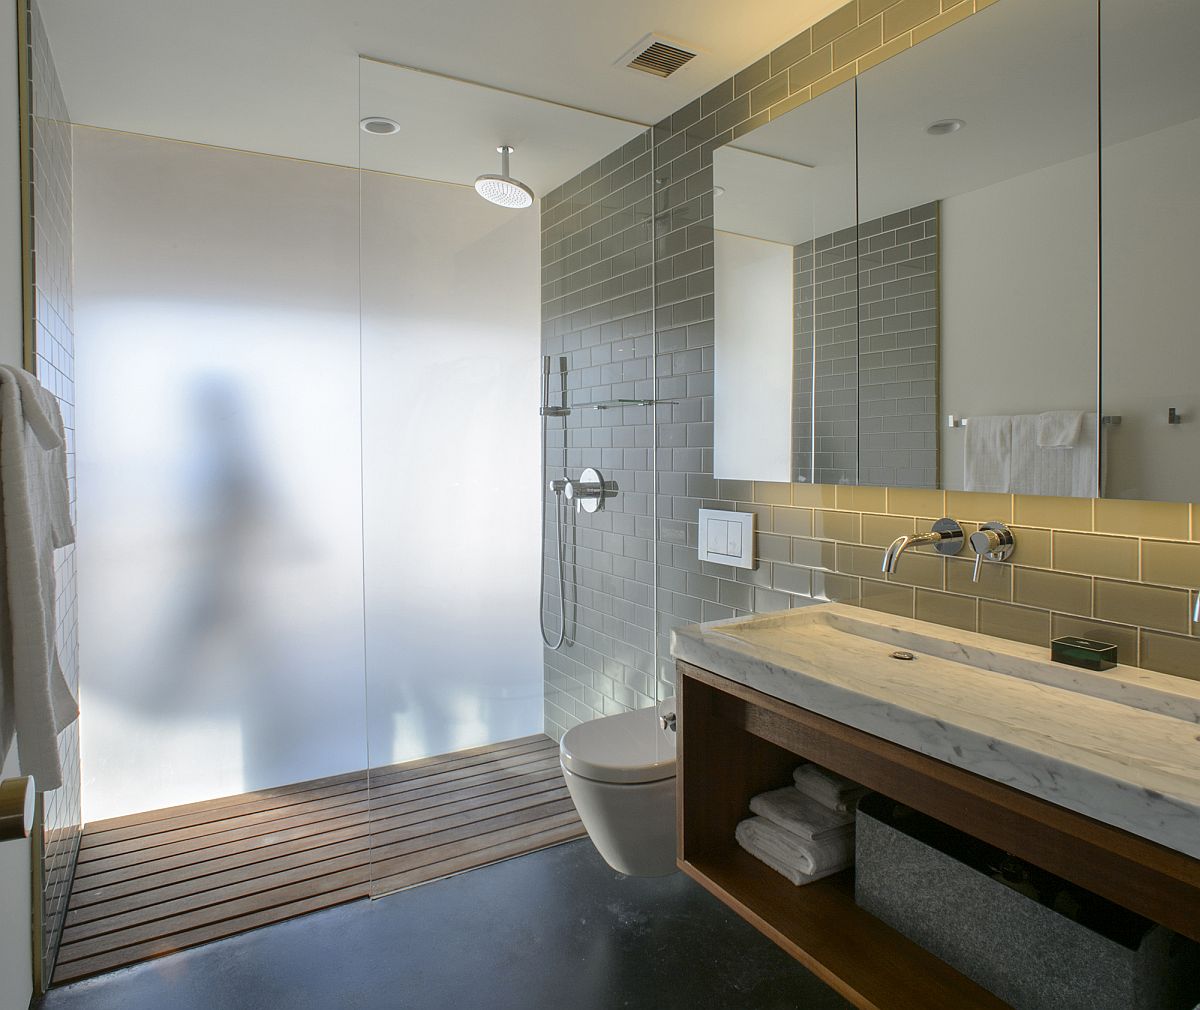 Translucent doors and partition for the shower area